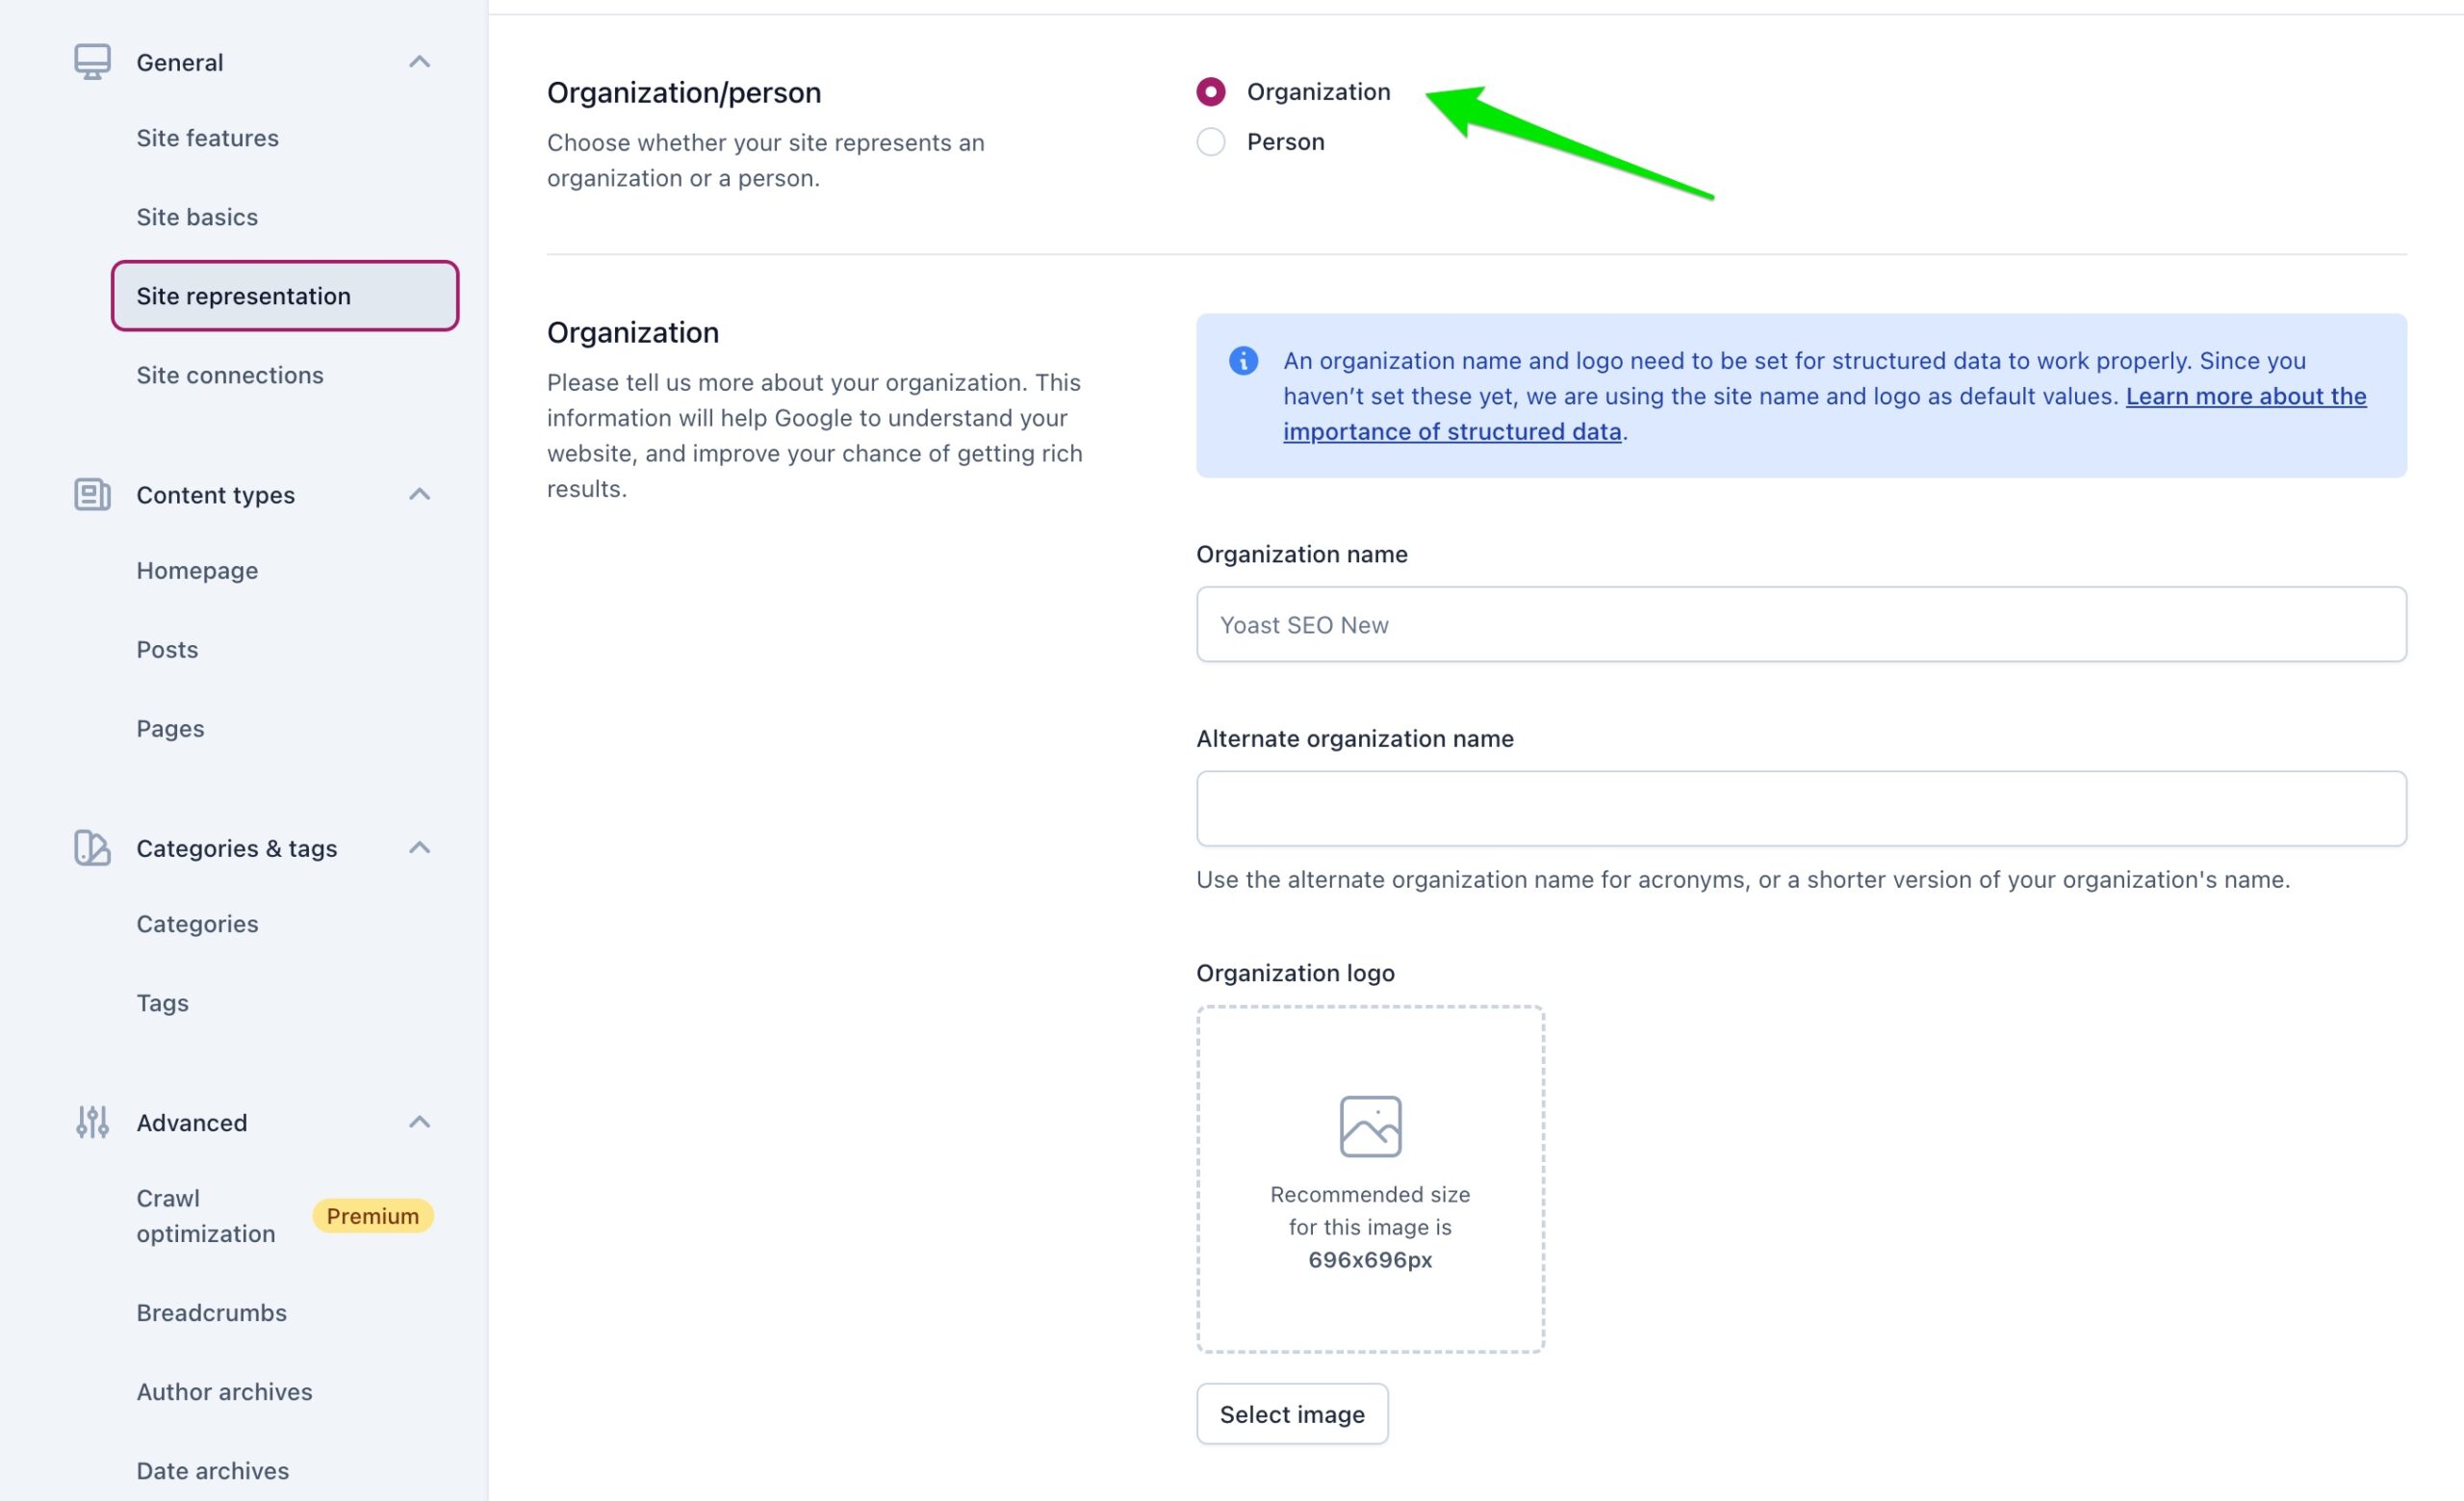 Screenshot showing the site representation settings for organizations in Yoast SEO